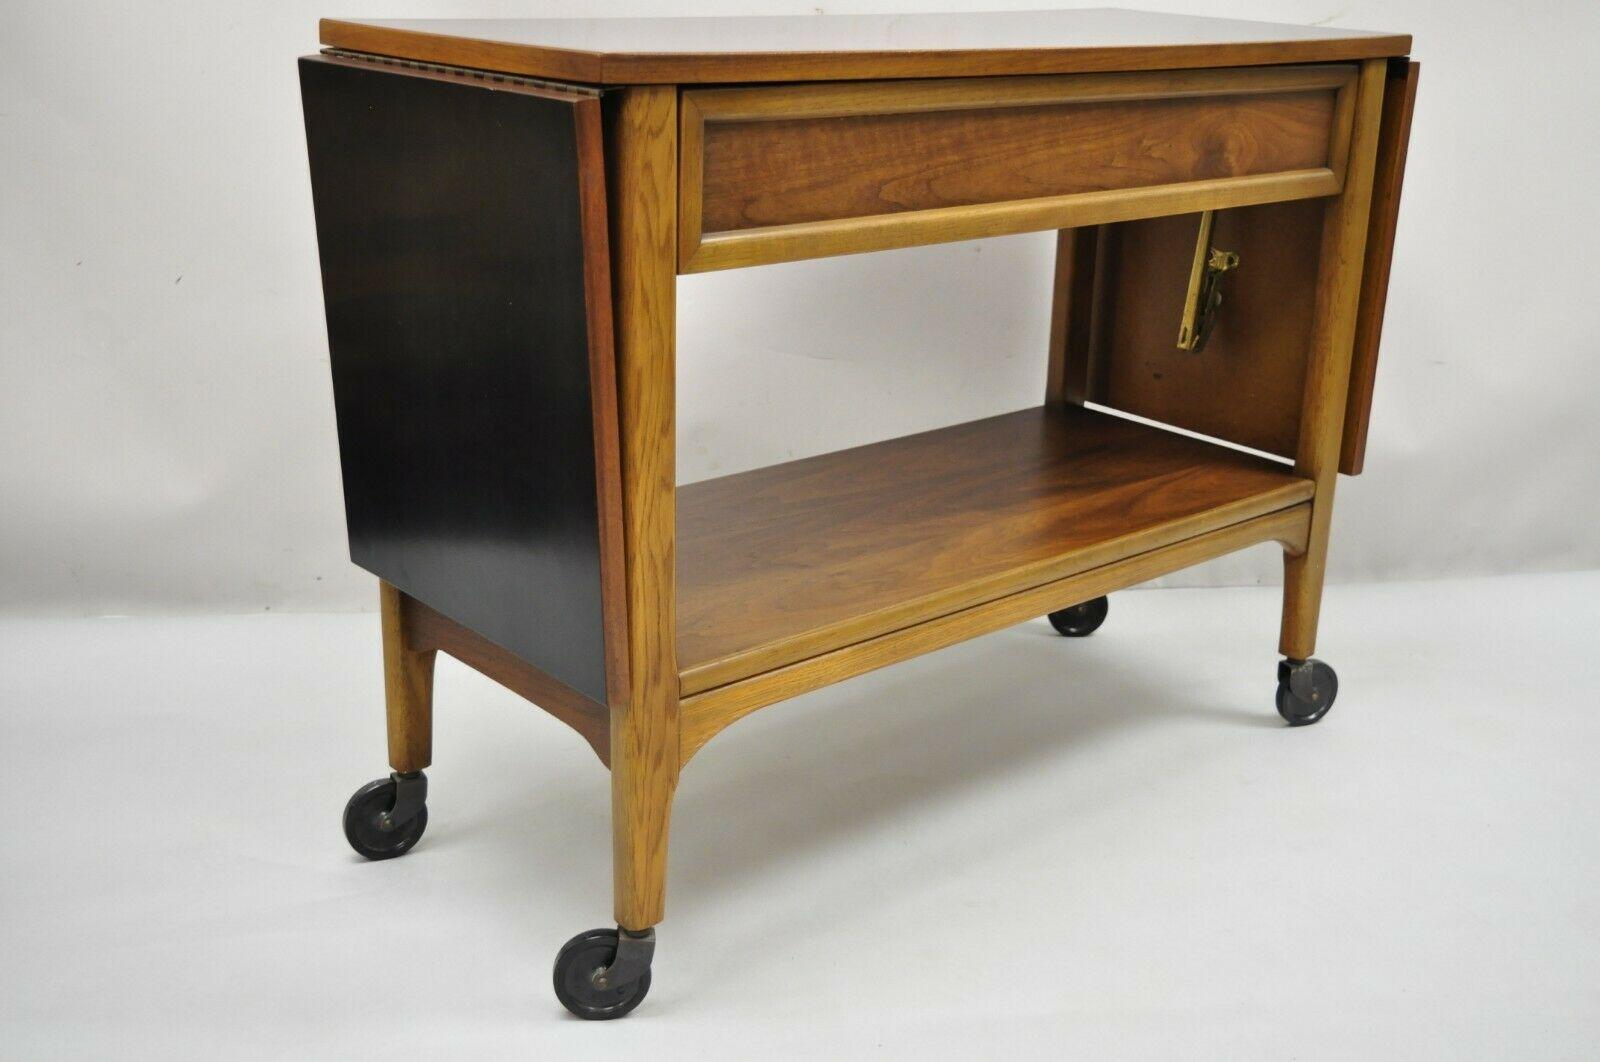 Lane Mid Century Modern Walnut Modern One Drawer Drop Leaf Rolling Bar Cart. Item features drop leaf sides, rolling casters, black laminated top,1 dovetailed drawer, finished back, clean modernist lines, quality American craftsmanship. Circa Mid